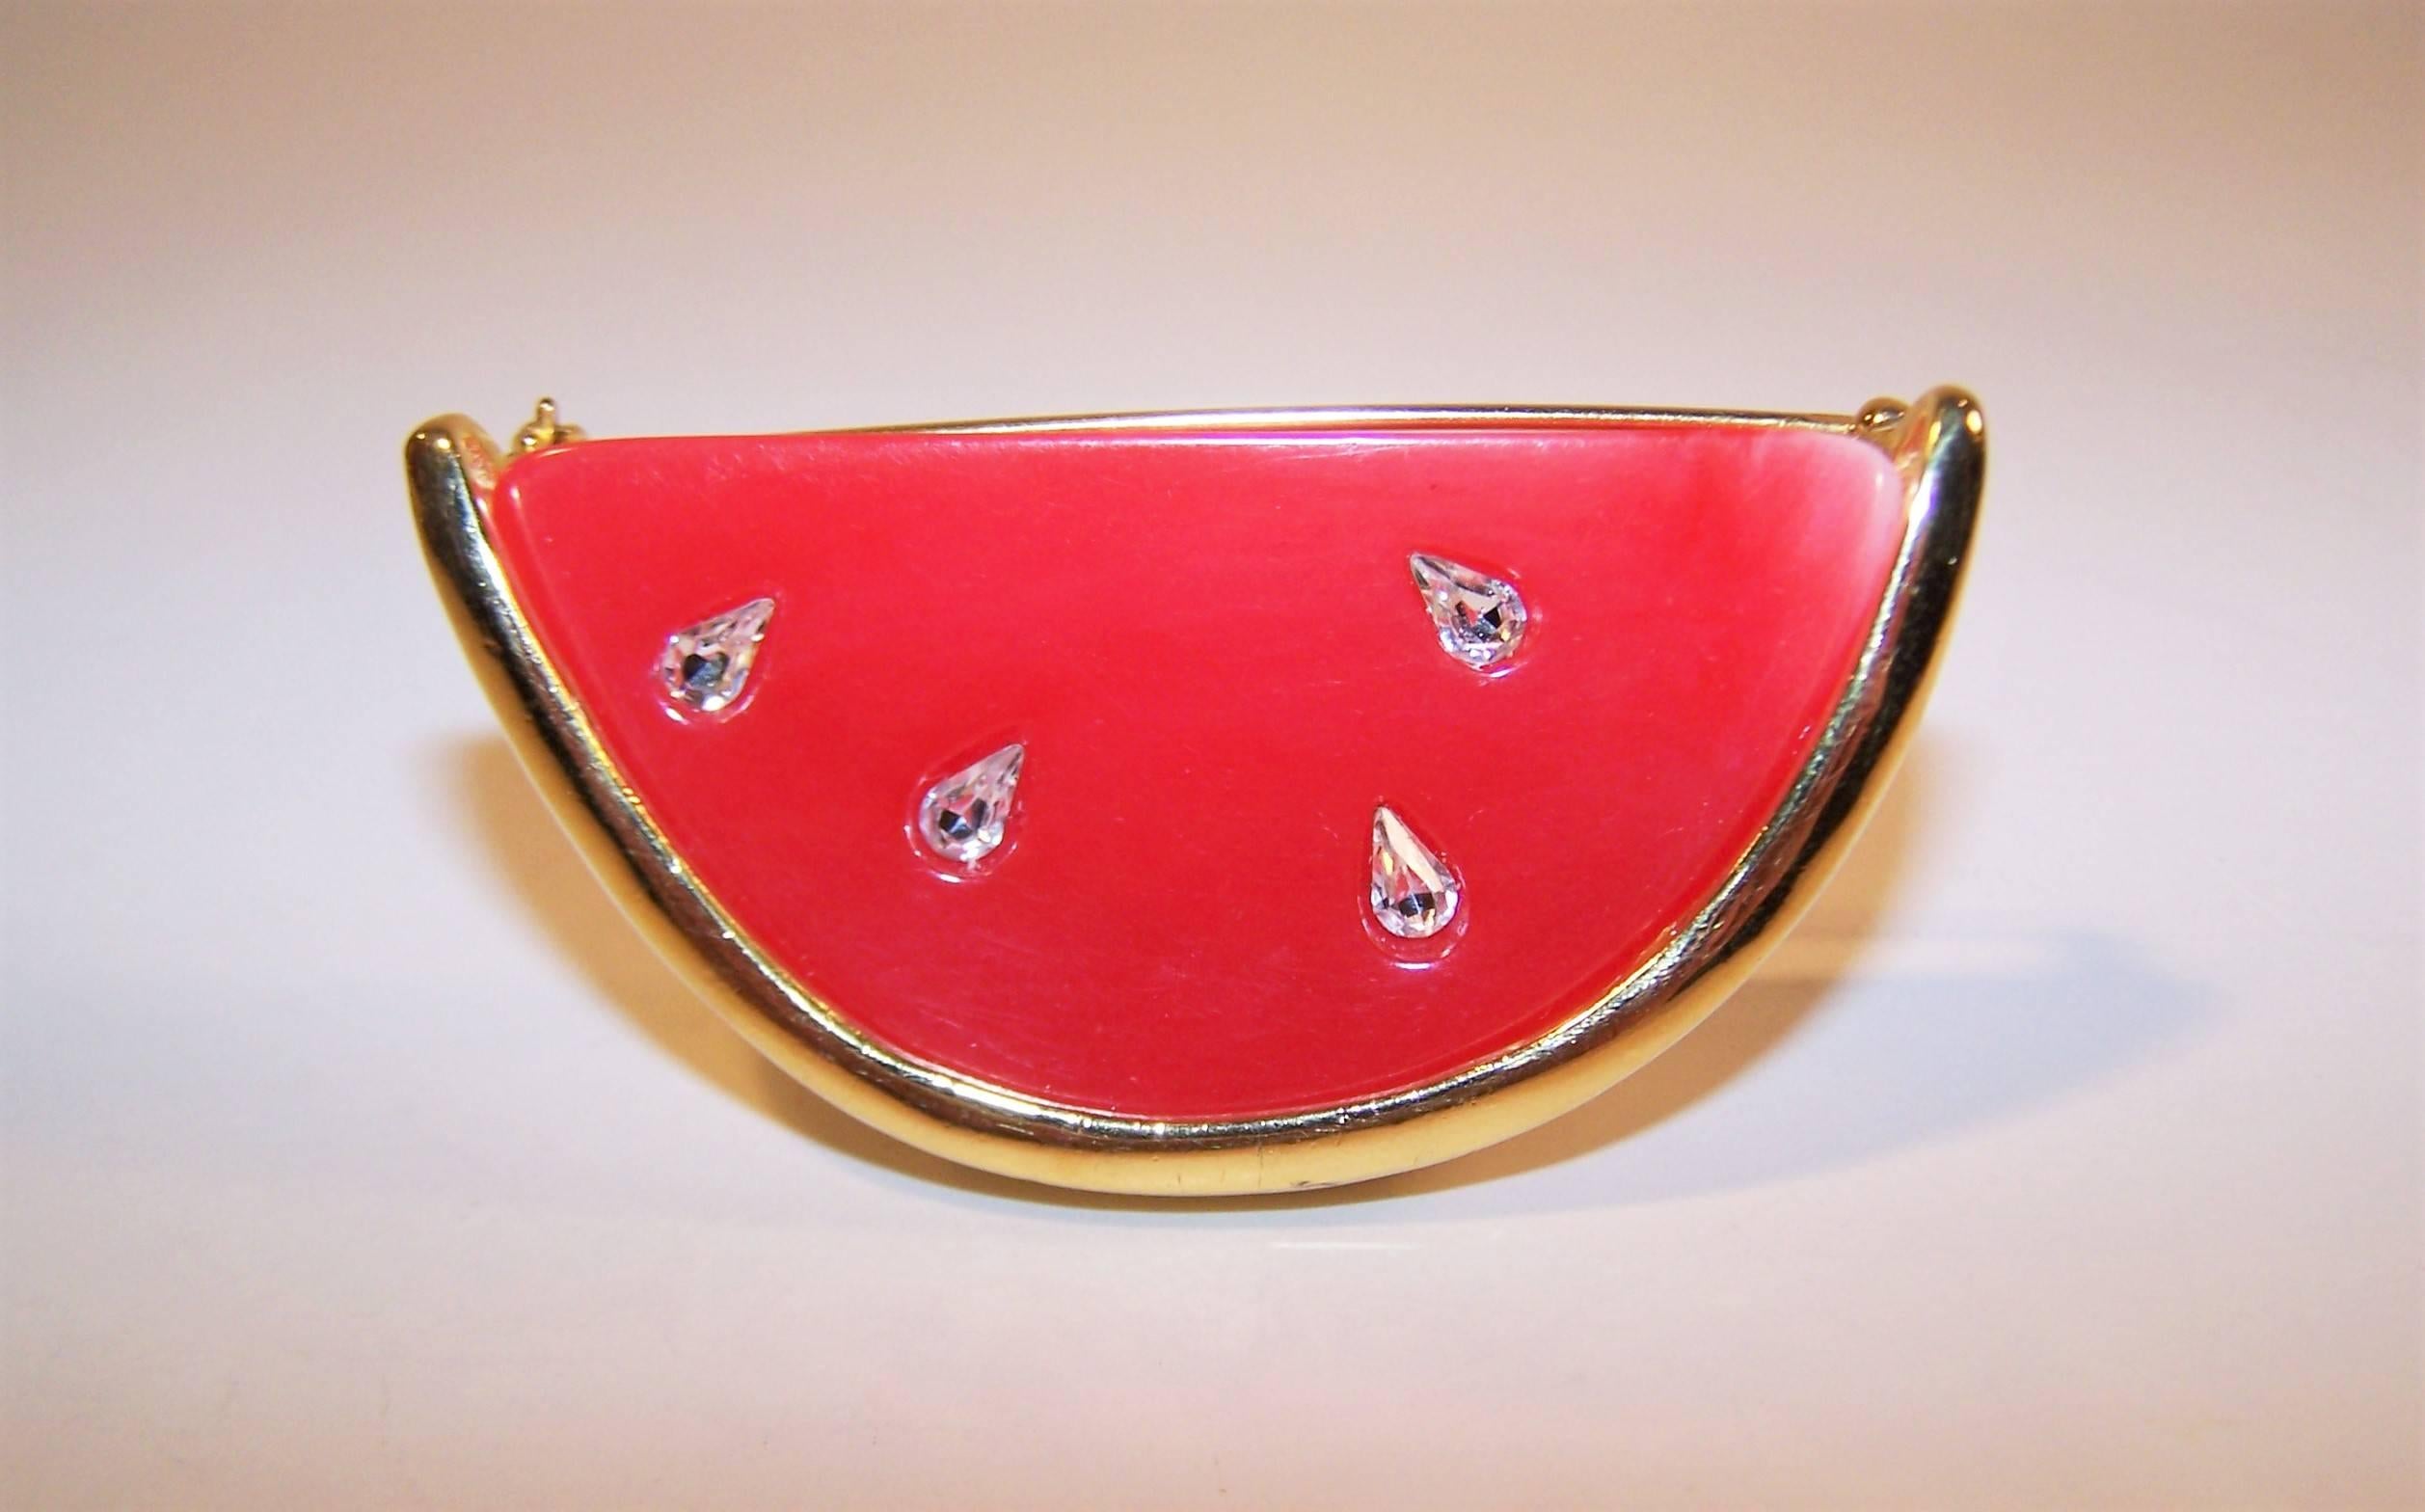 Women's Summery Vintage Givenchy Watermelon Brooch With Rhinestone Seeds